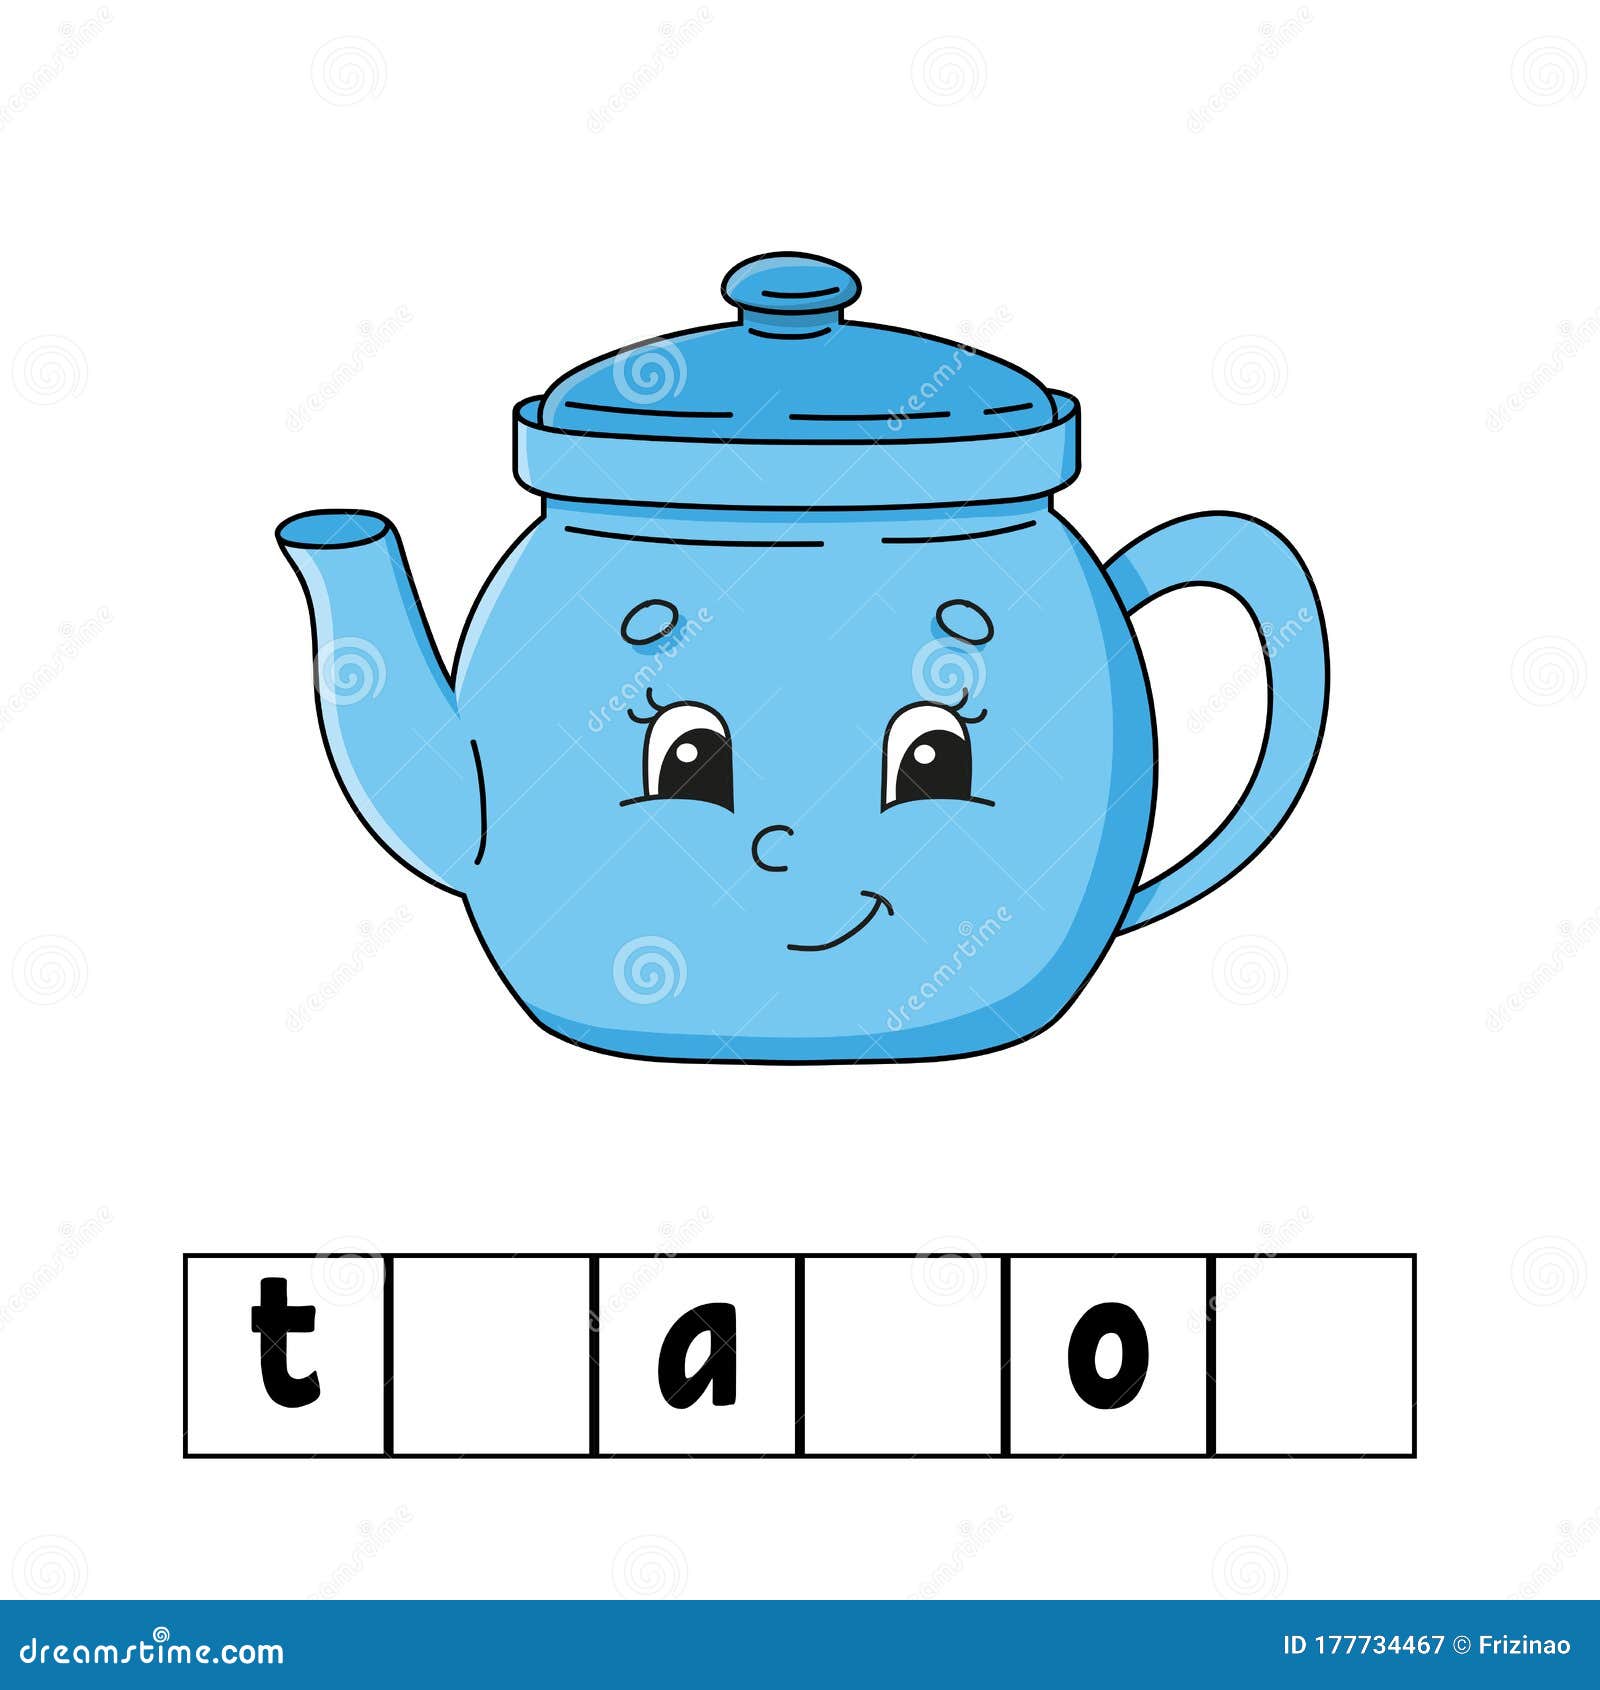 words-puzzle-teapot-education-developing-worksheet-learning-game-for-kids-color-activity